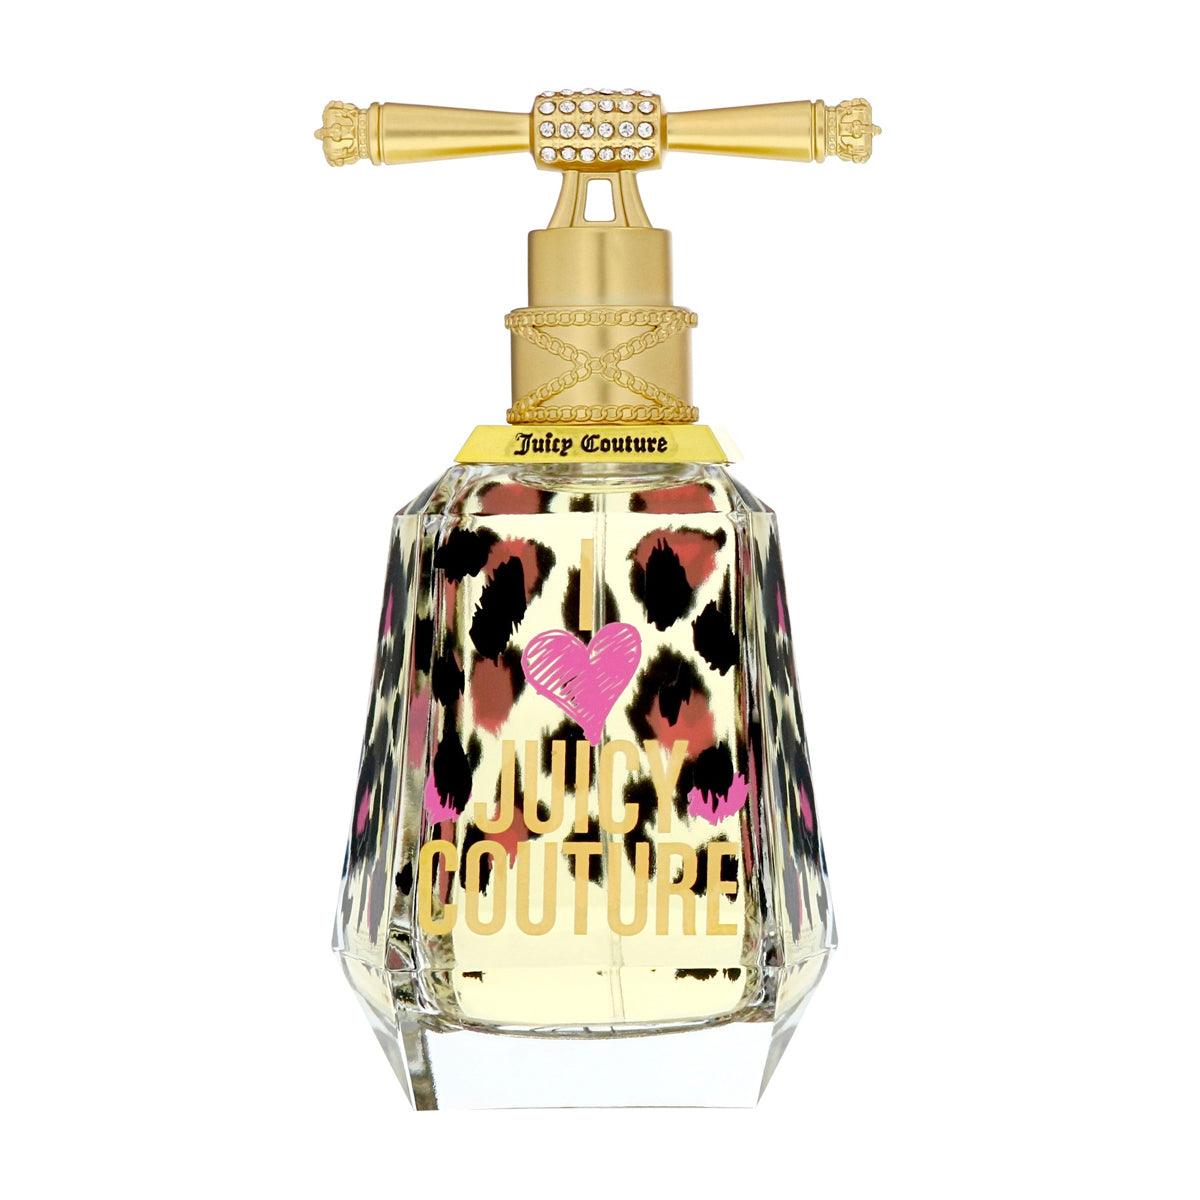 Juicy Couture I Love Juicy Couture For Women Edp 100ml Spray-Perfume - Allurebeautypk